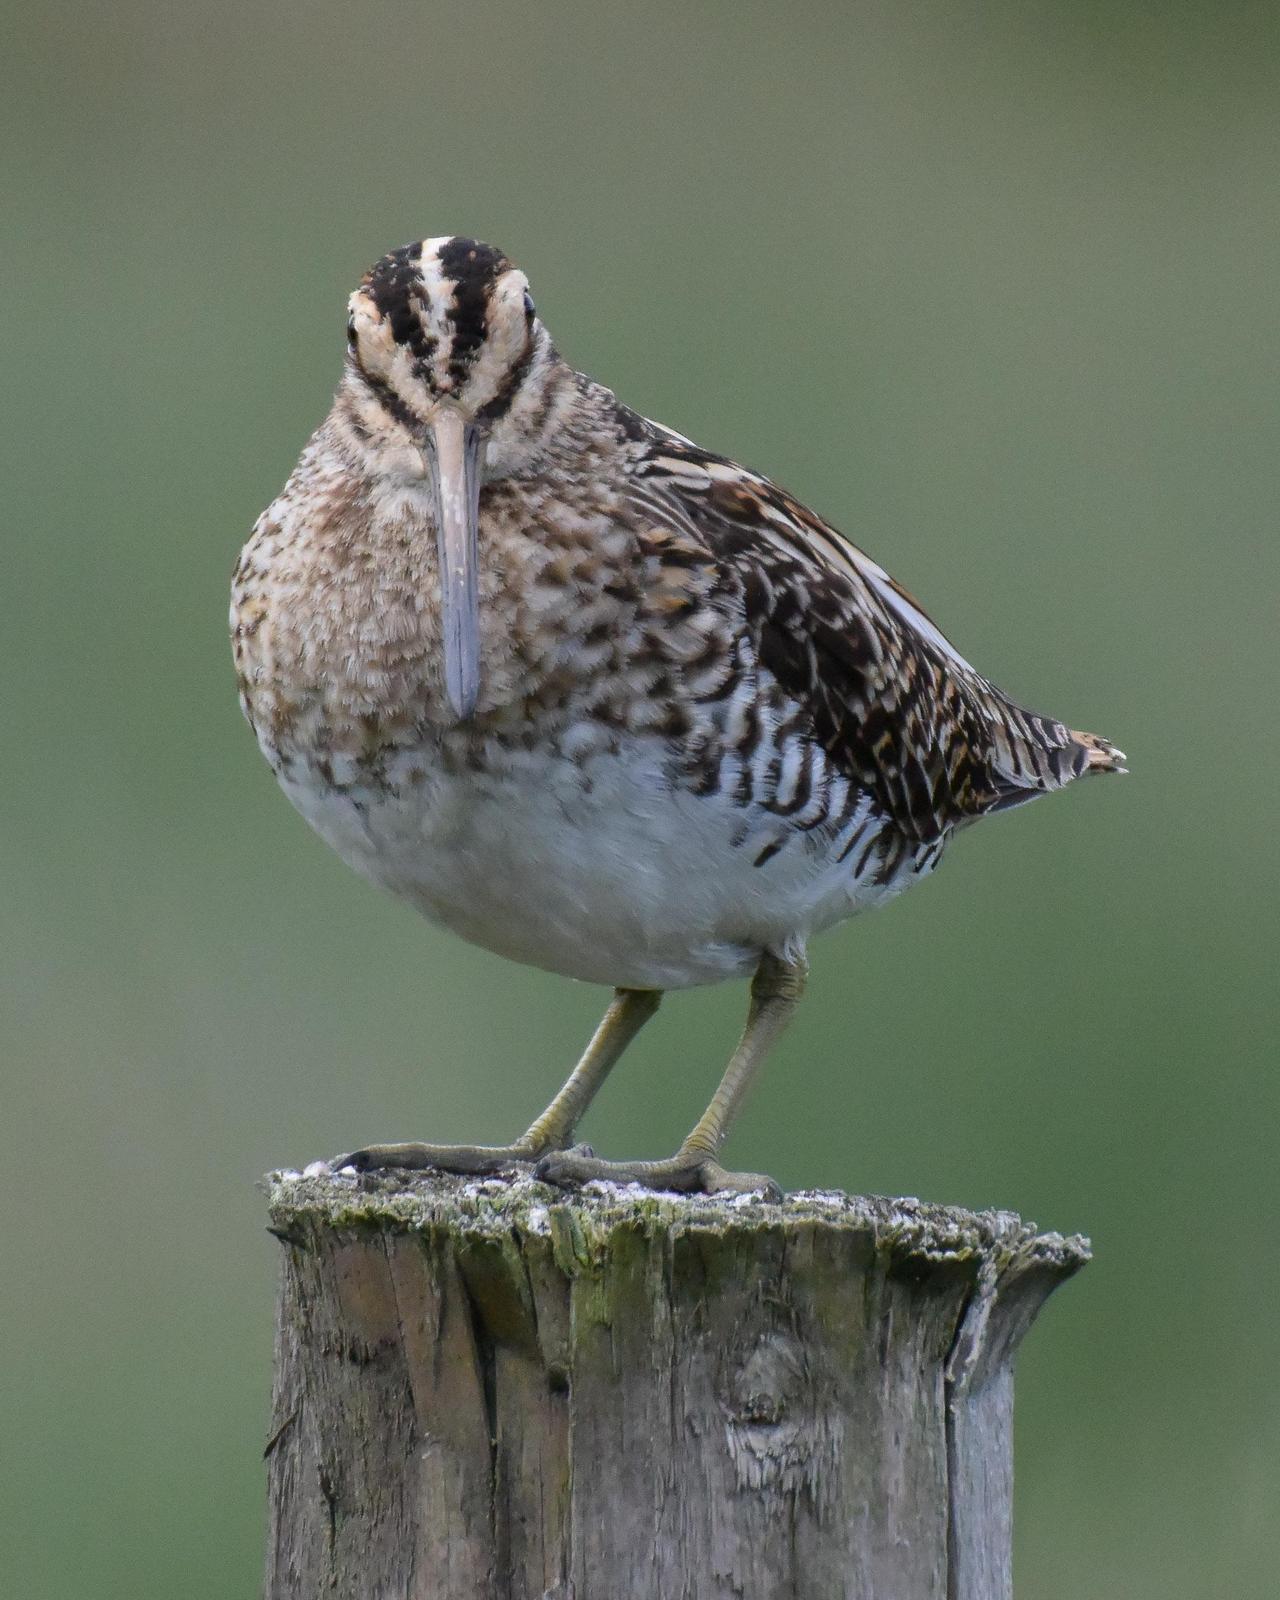 Common Snipe Photo by Emily Percival